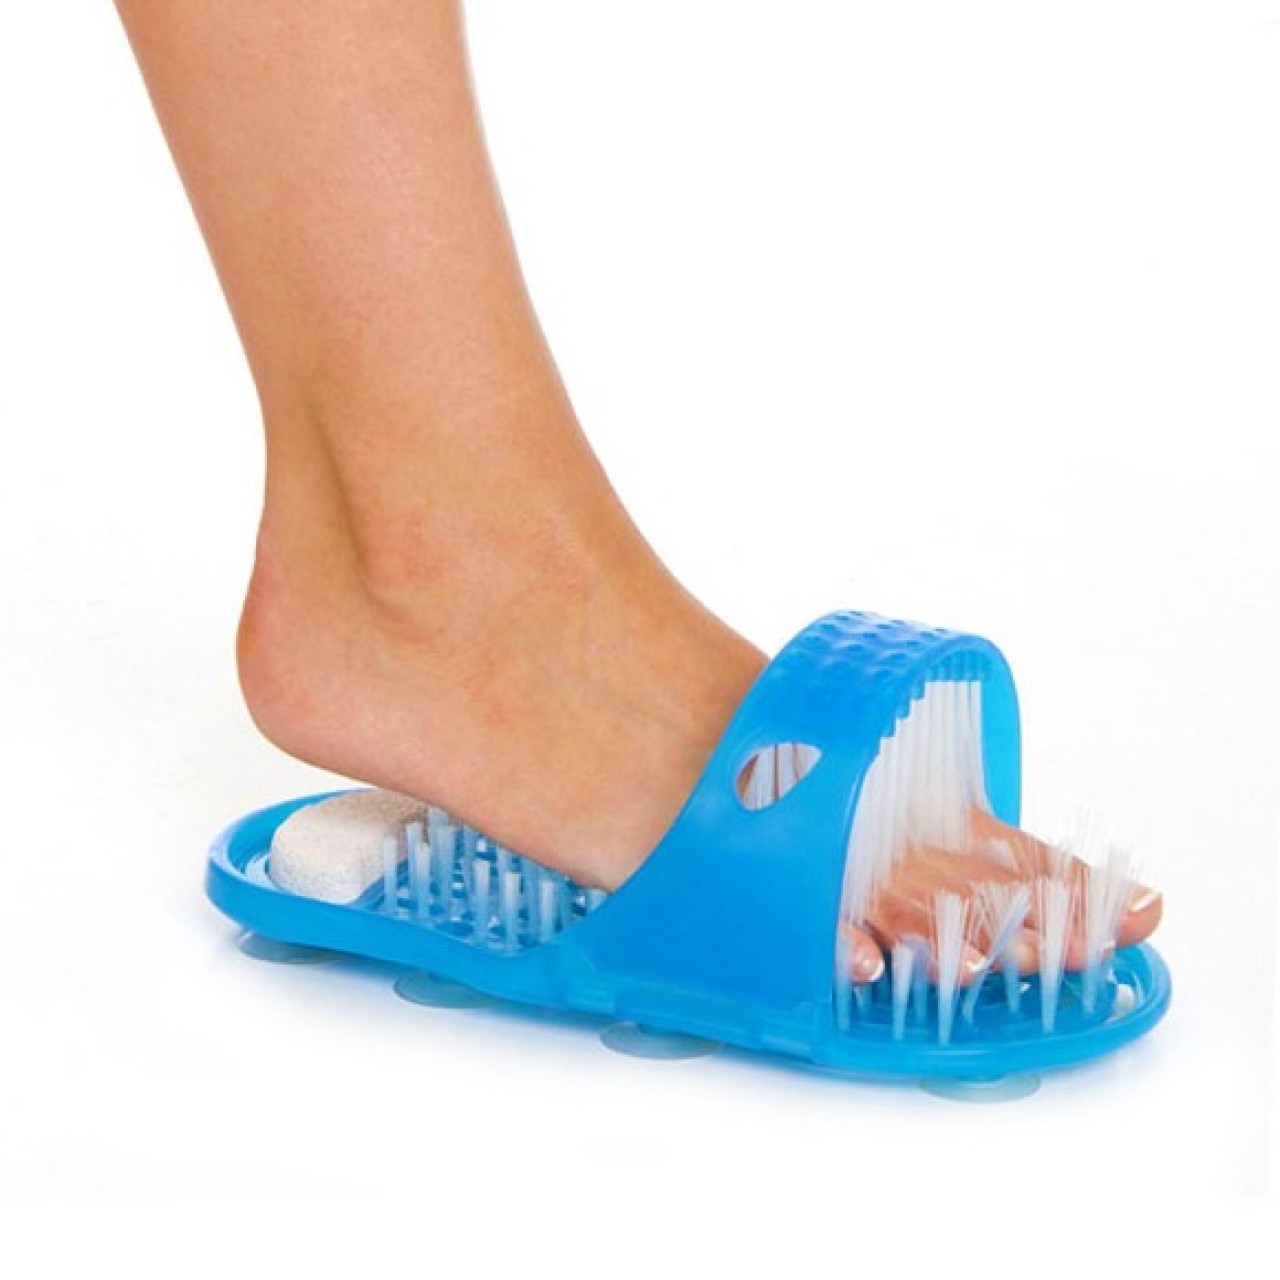 Easy Feet Scrubber Shower Sandal - No More Bending or Stretching